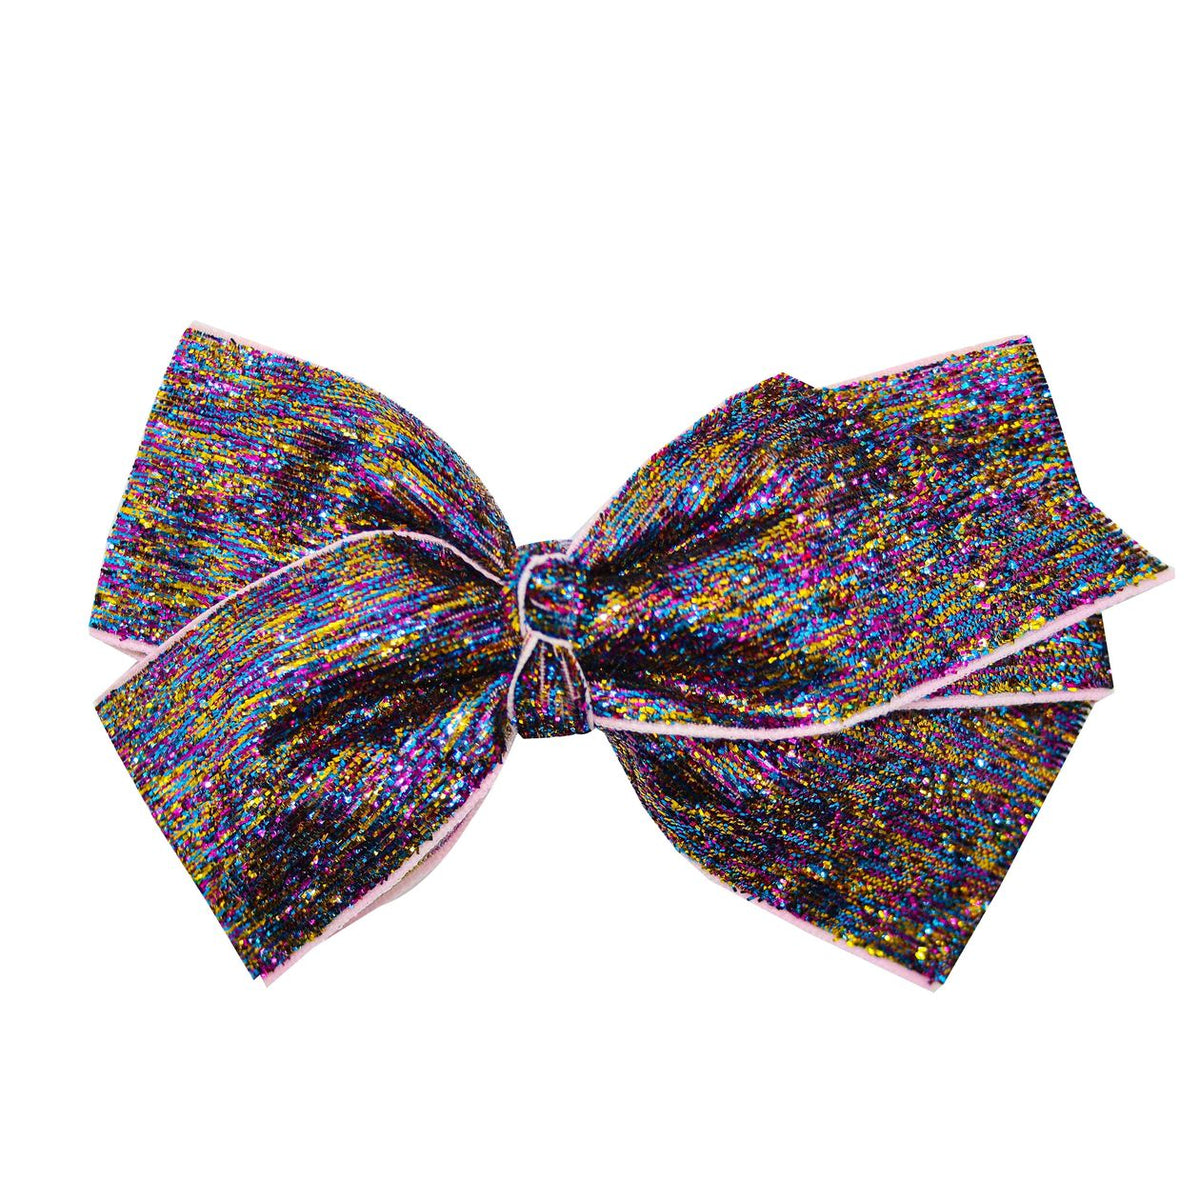 No Shed Glitter Bow - Rainbow